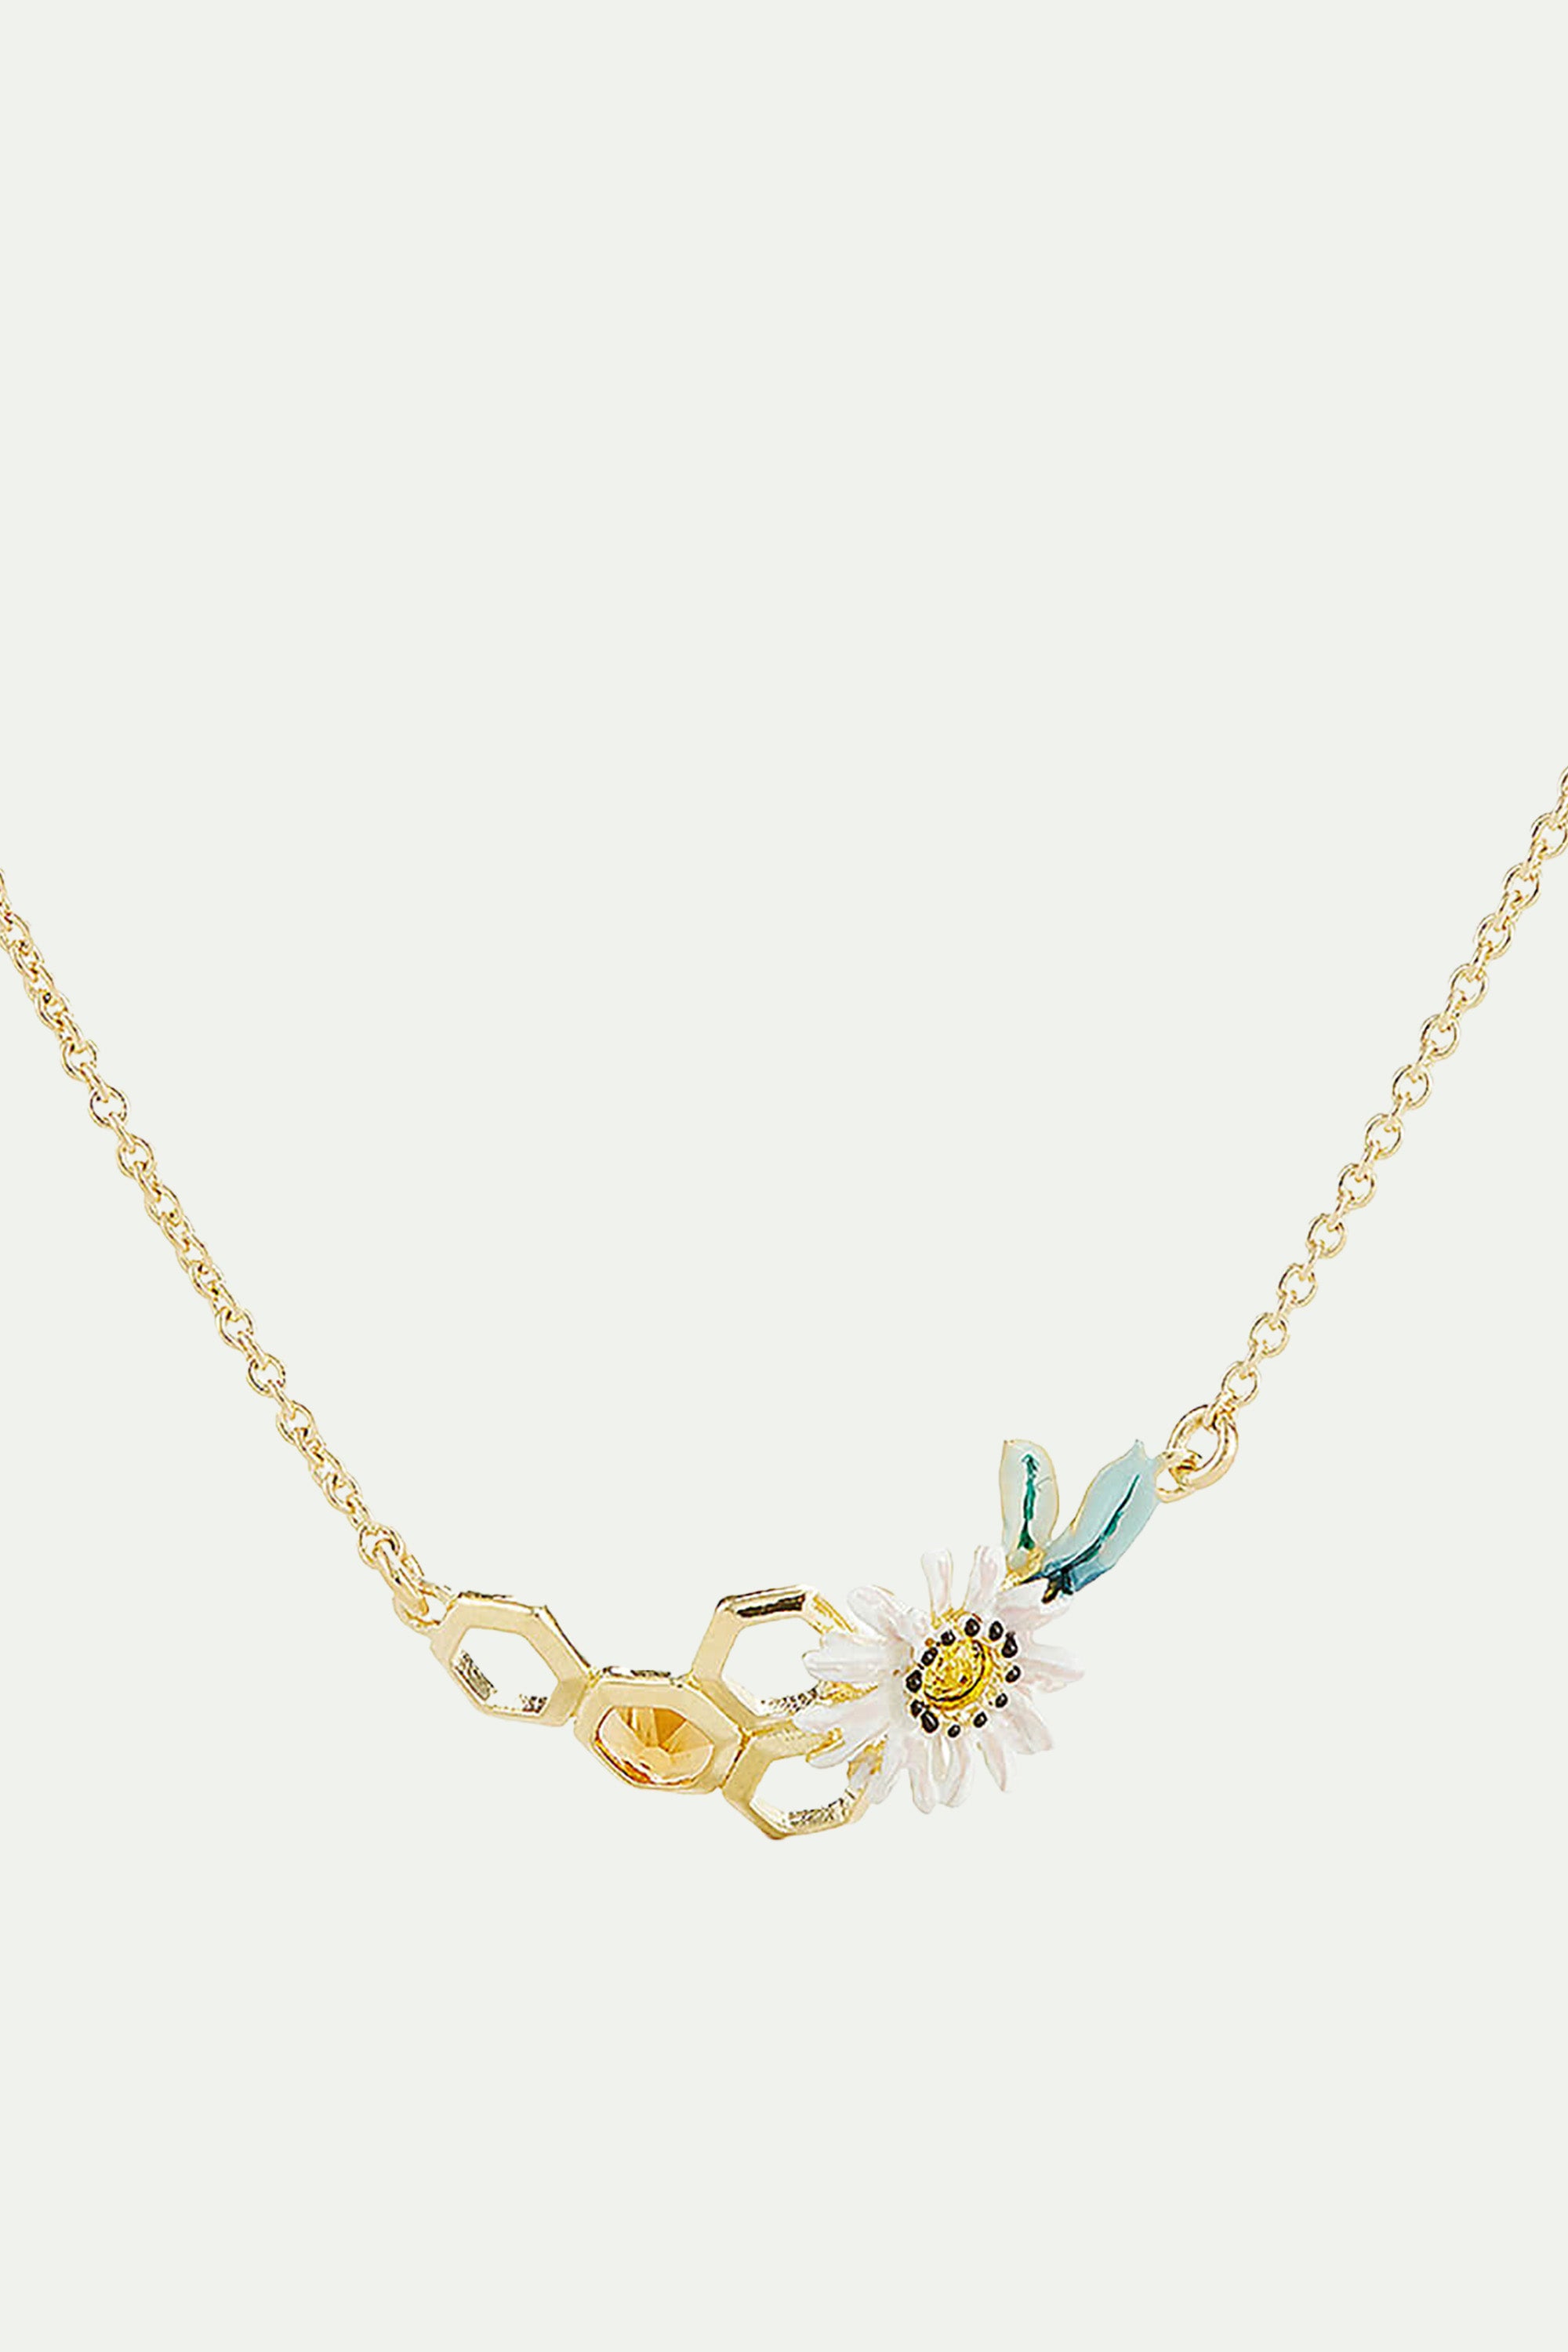 Marguerite and honeycombs collar necklace